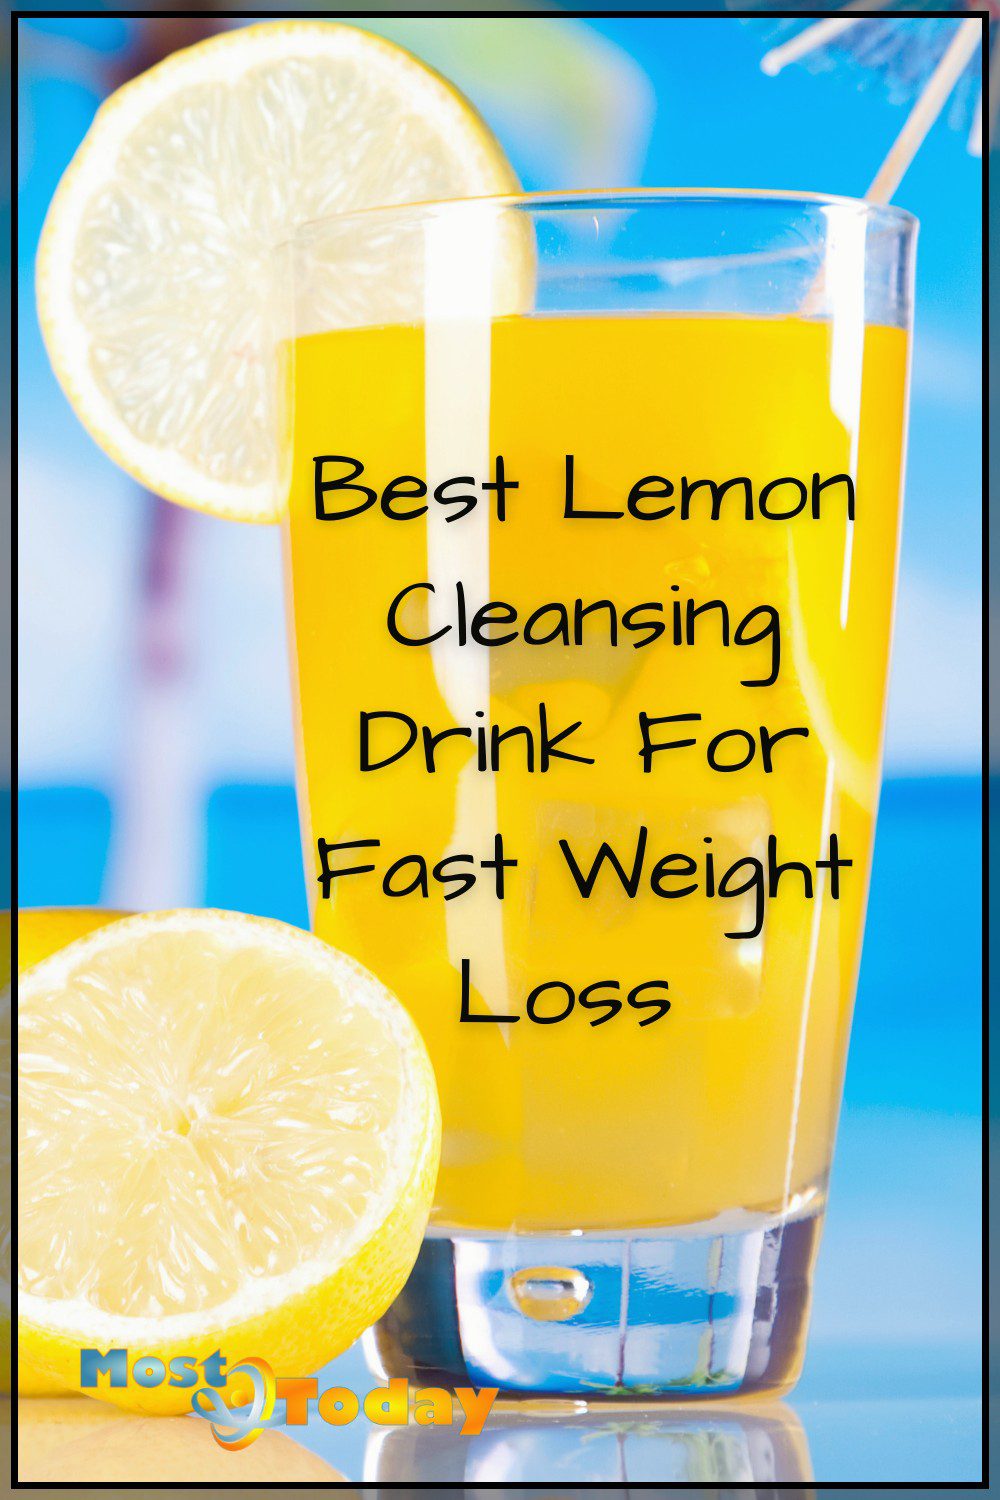 Best Lemon Cleansing Drink For Fast Weight Loss